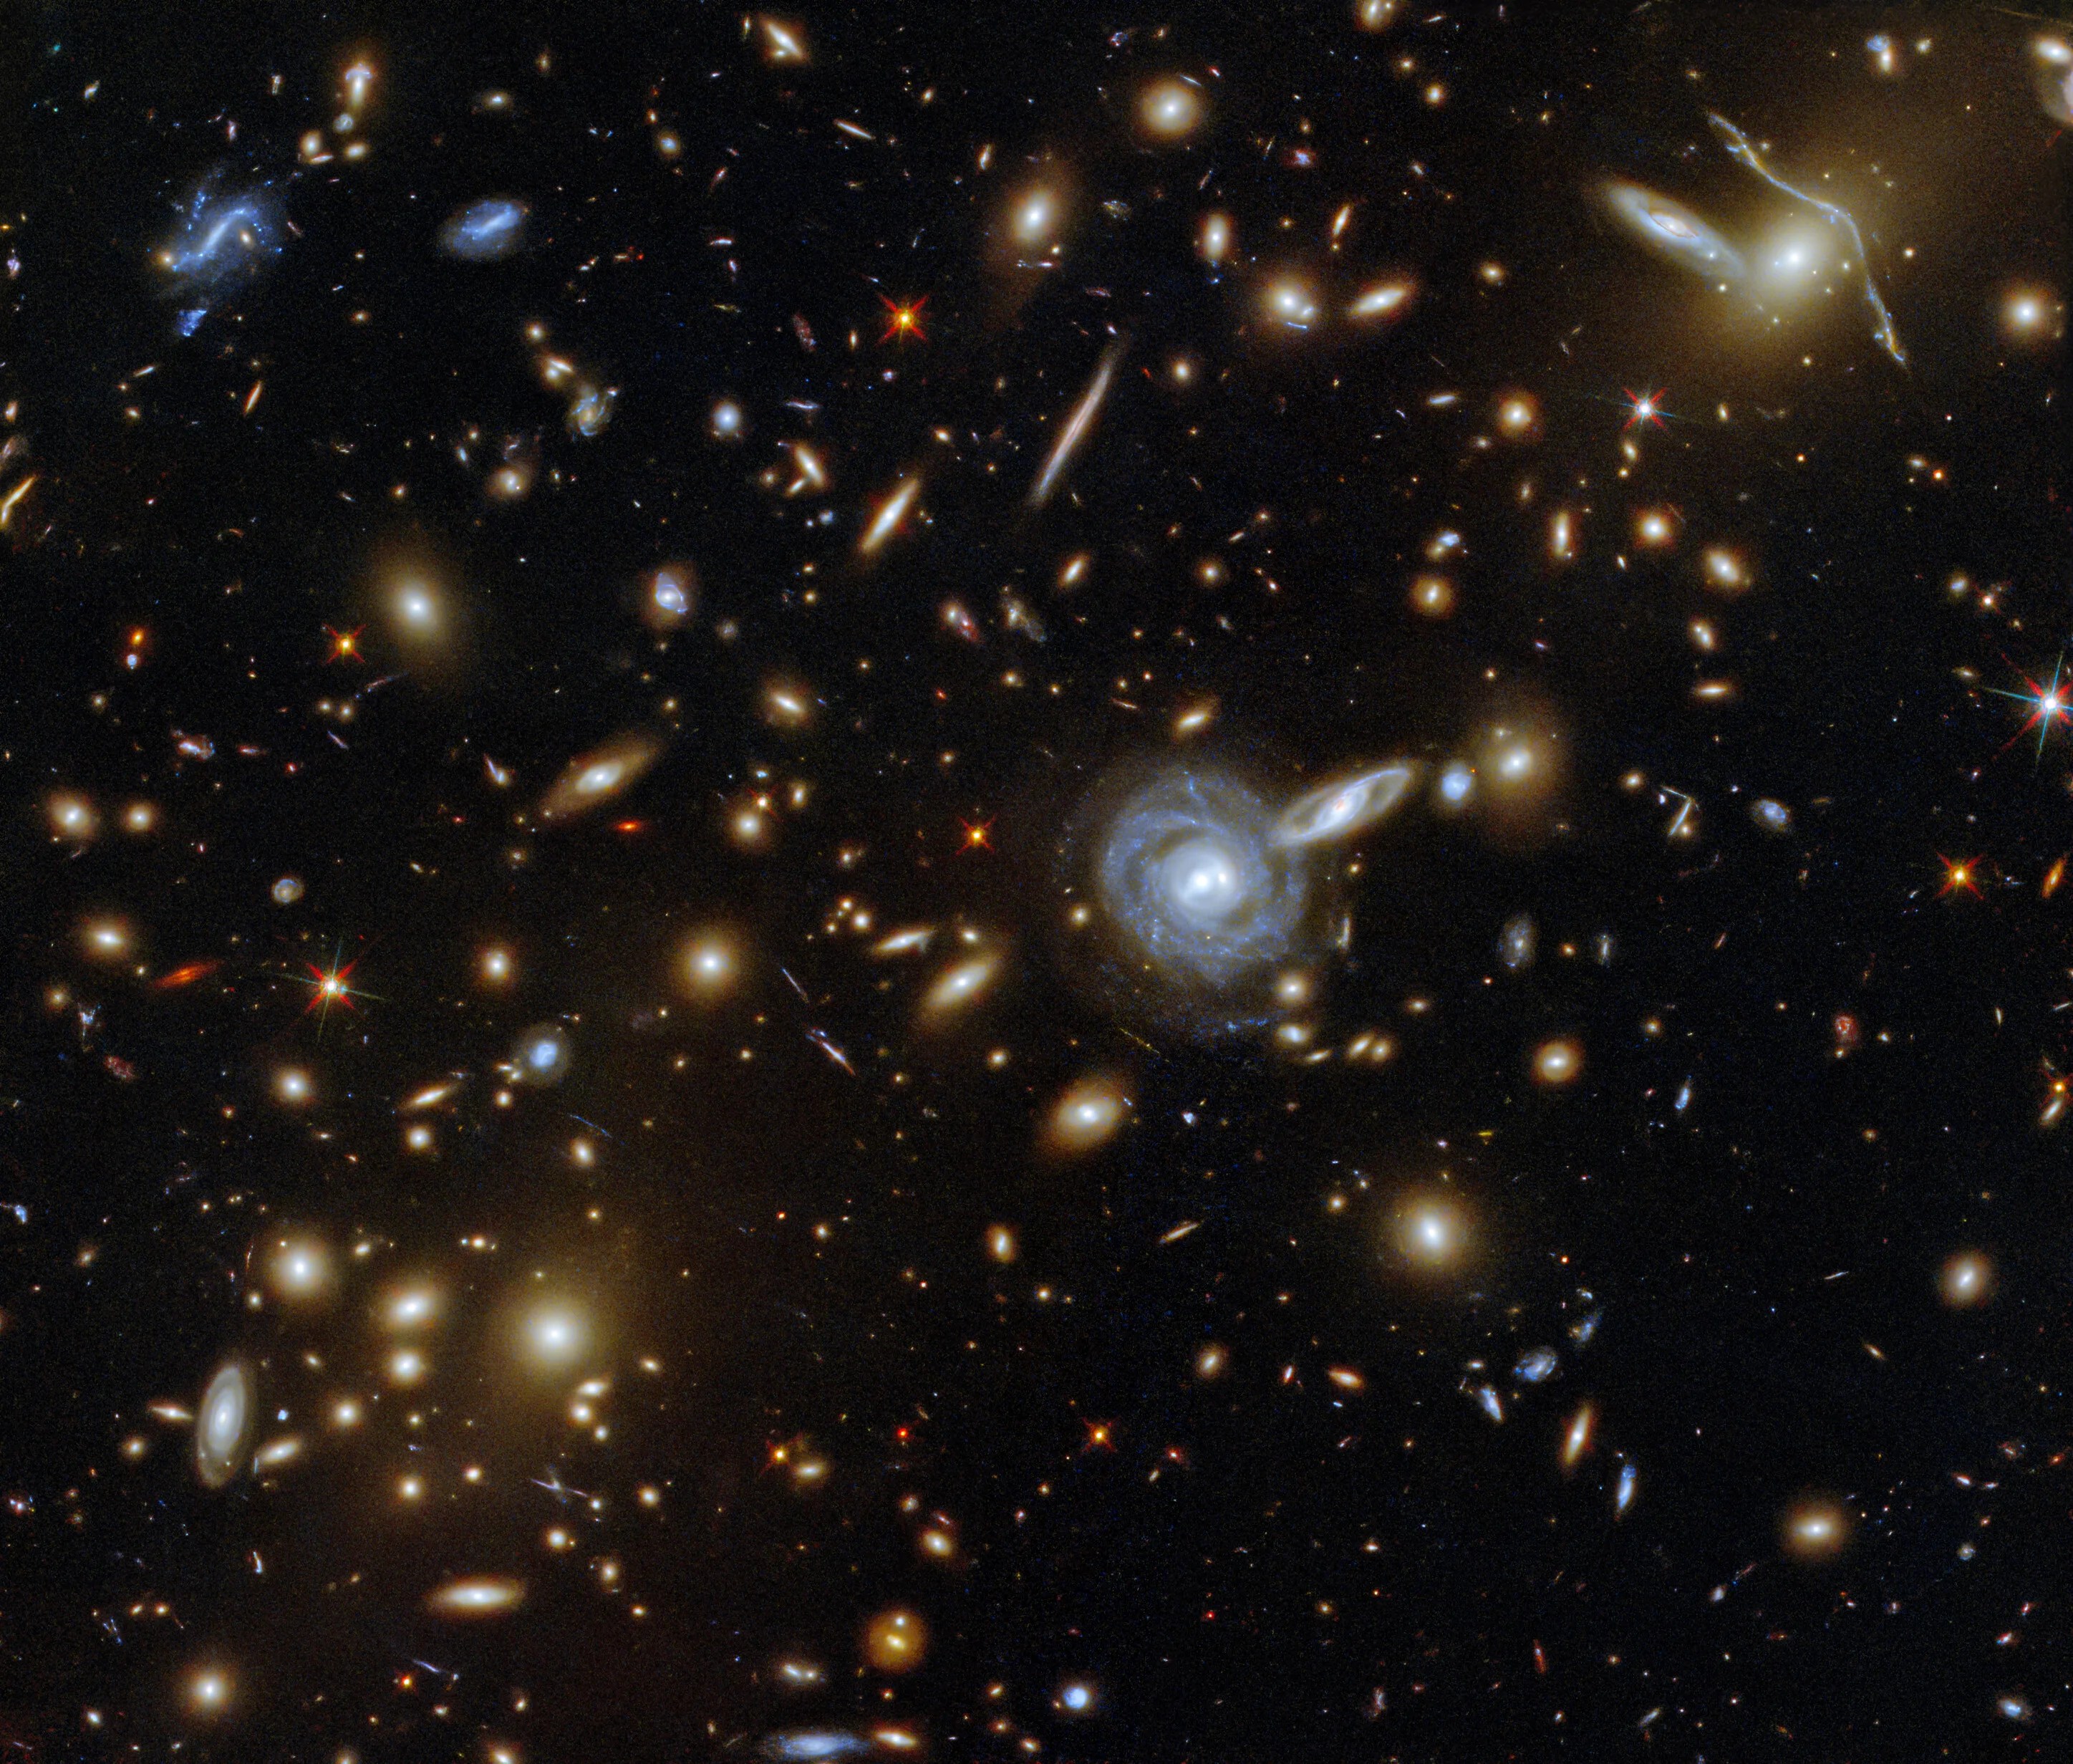 This packed image taken with the nasa/esa hubble space telescope showcases the galaxy cluster aco s 295, as well as a jostling crowd of background galaxies and foreground stars.